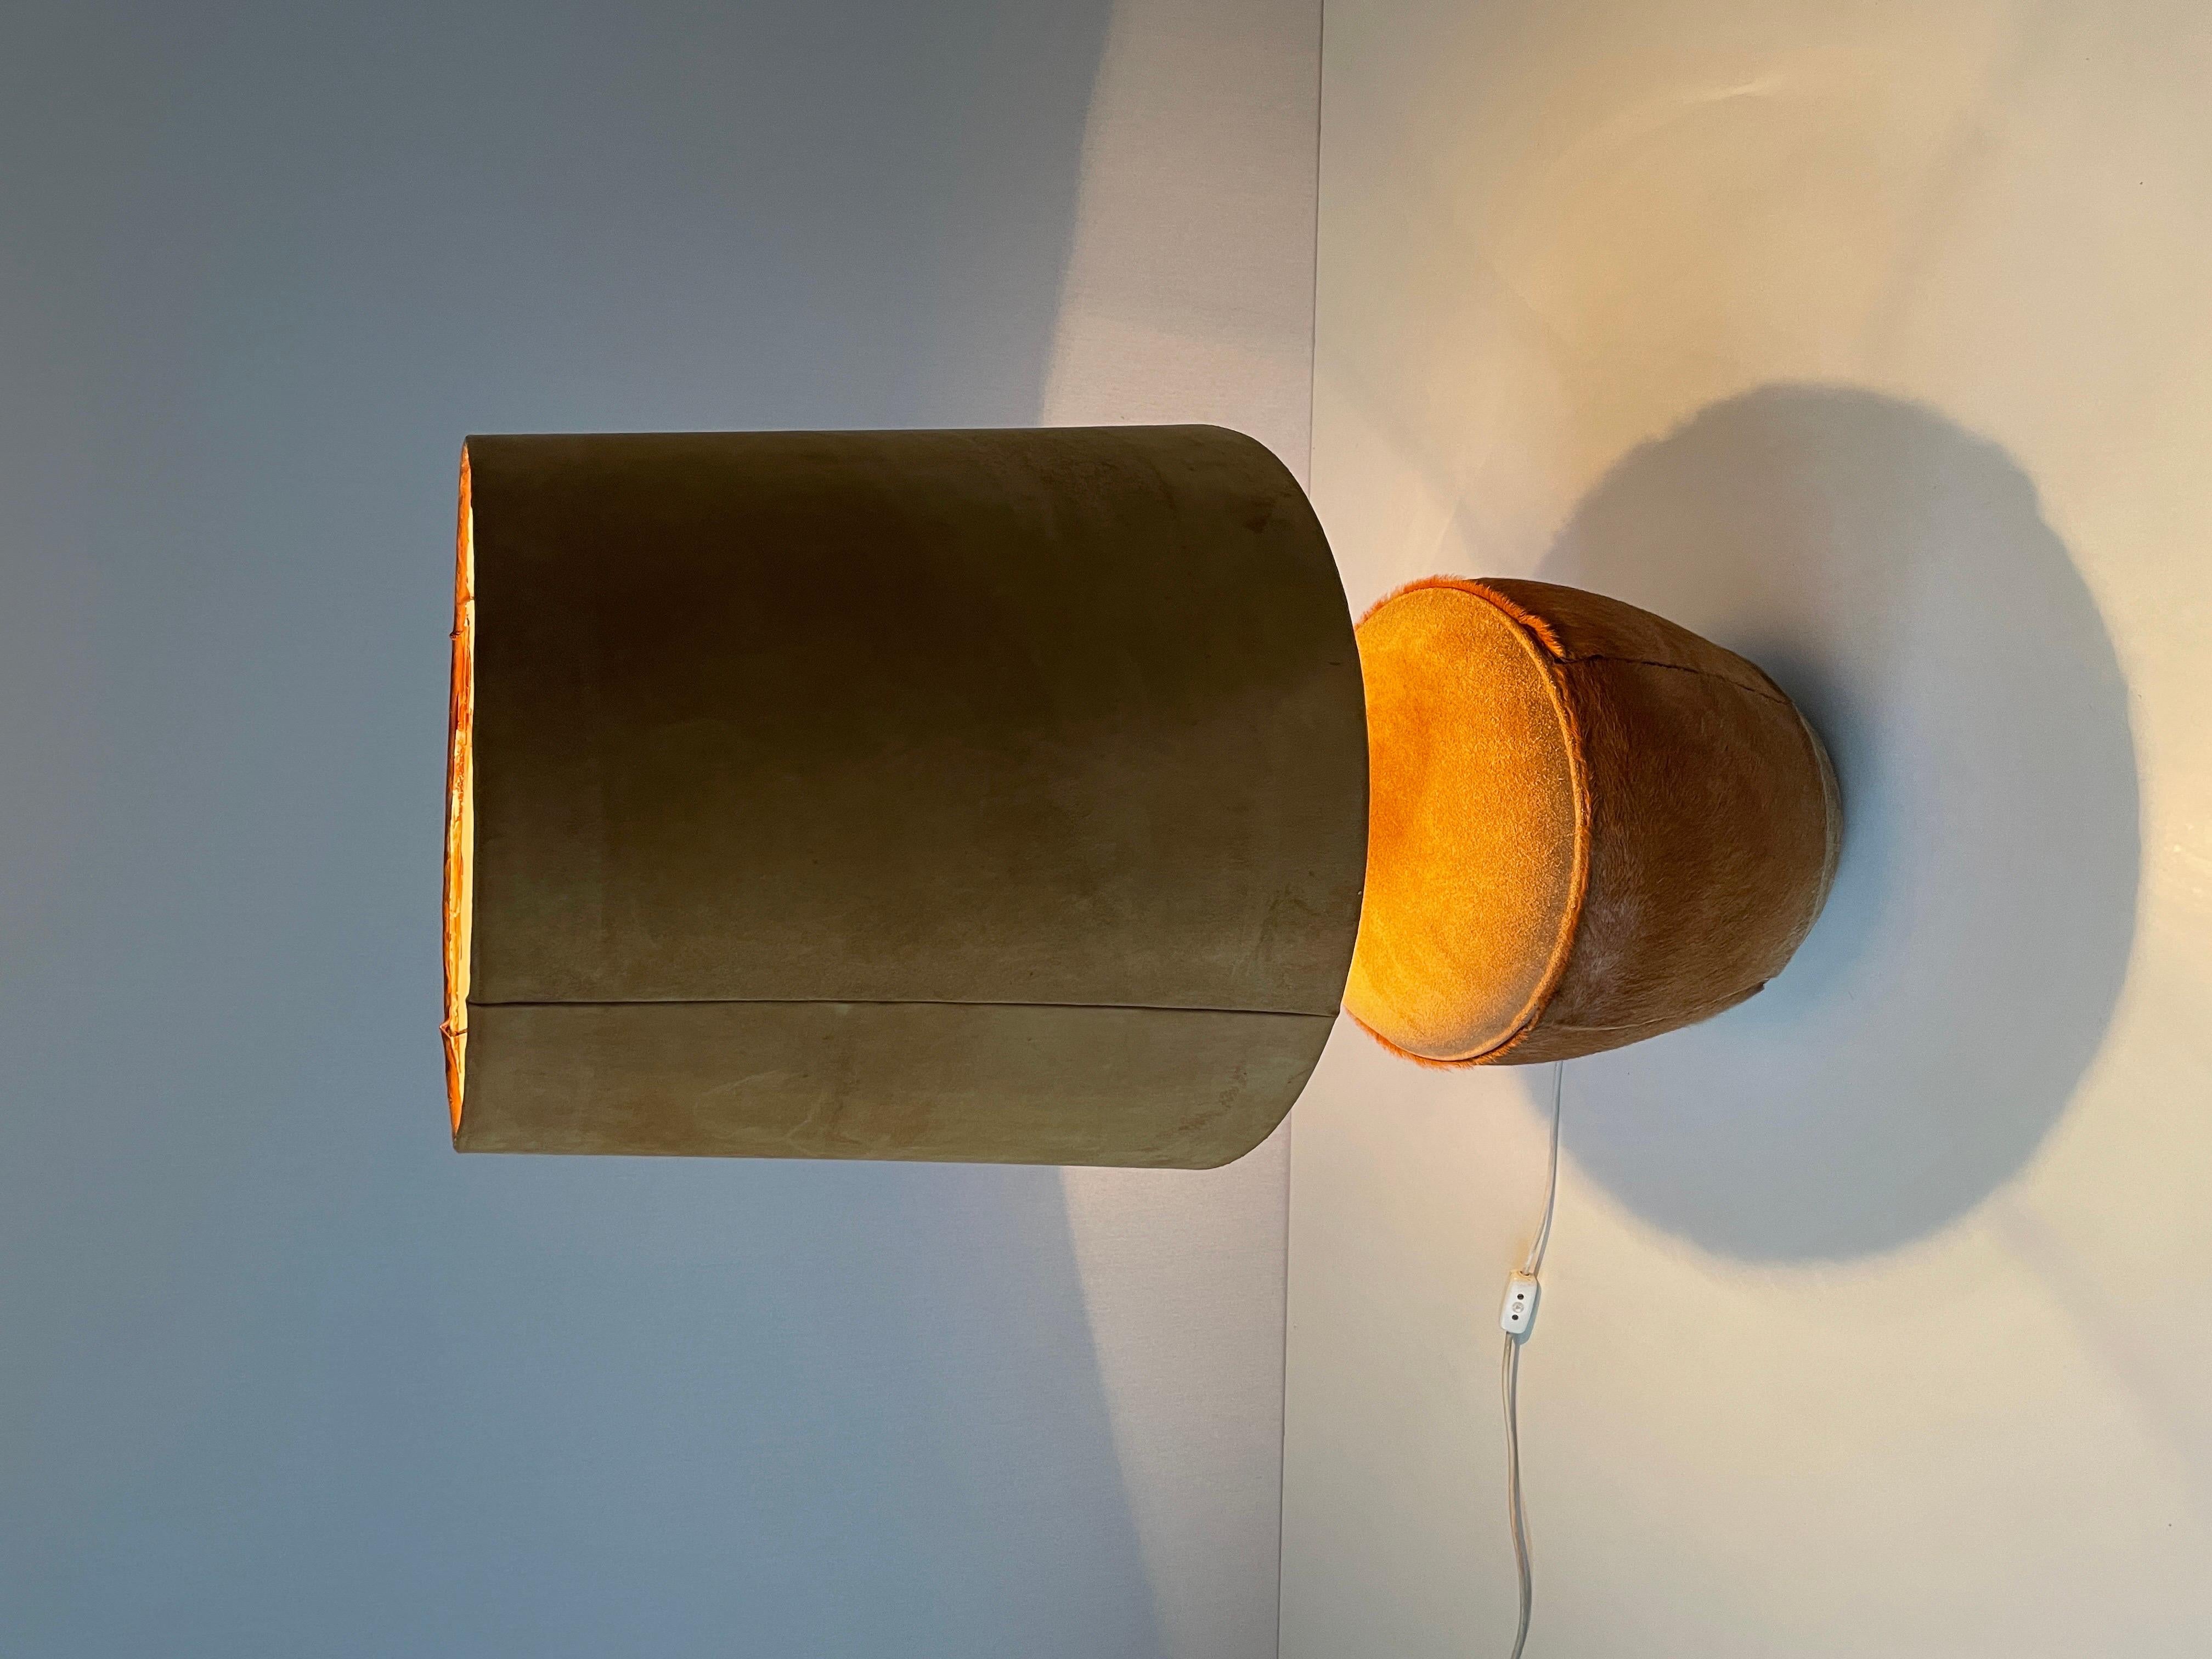 Tan Suede Leather and Glass Shade Floor or Table Lamp, 1960s, Denmark For Sale 7